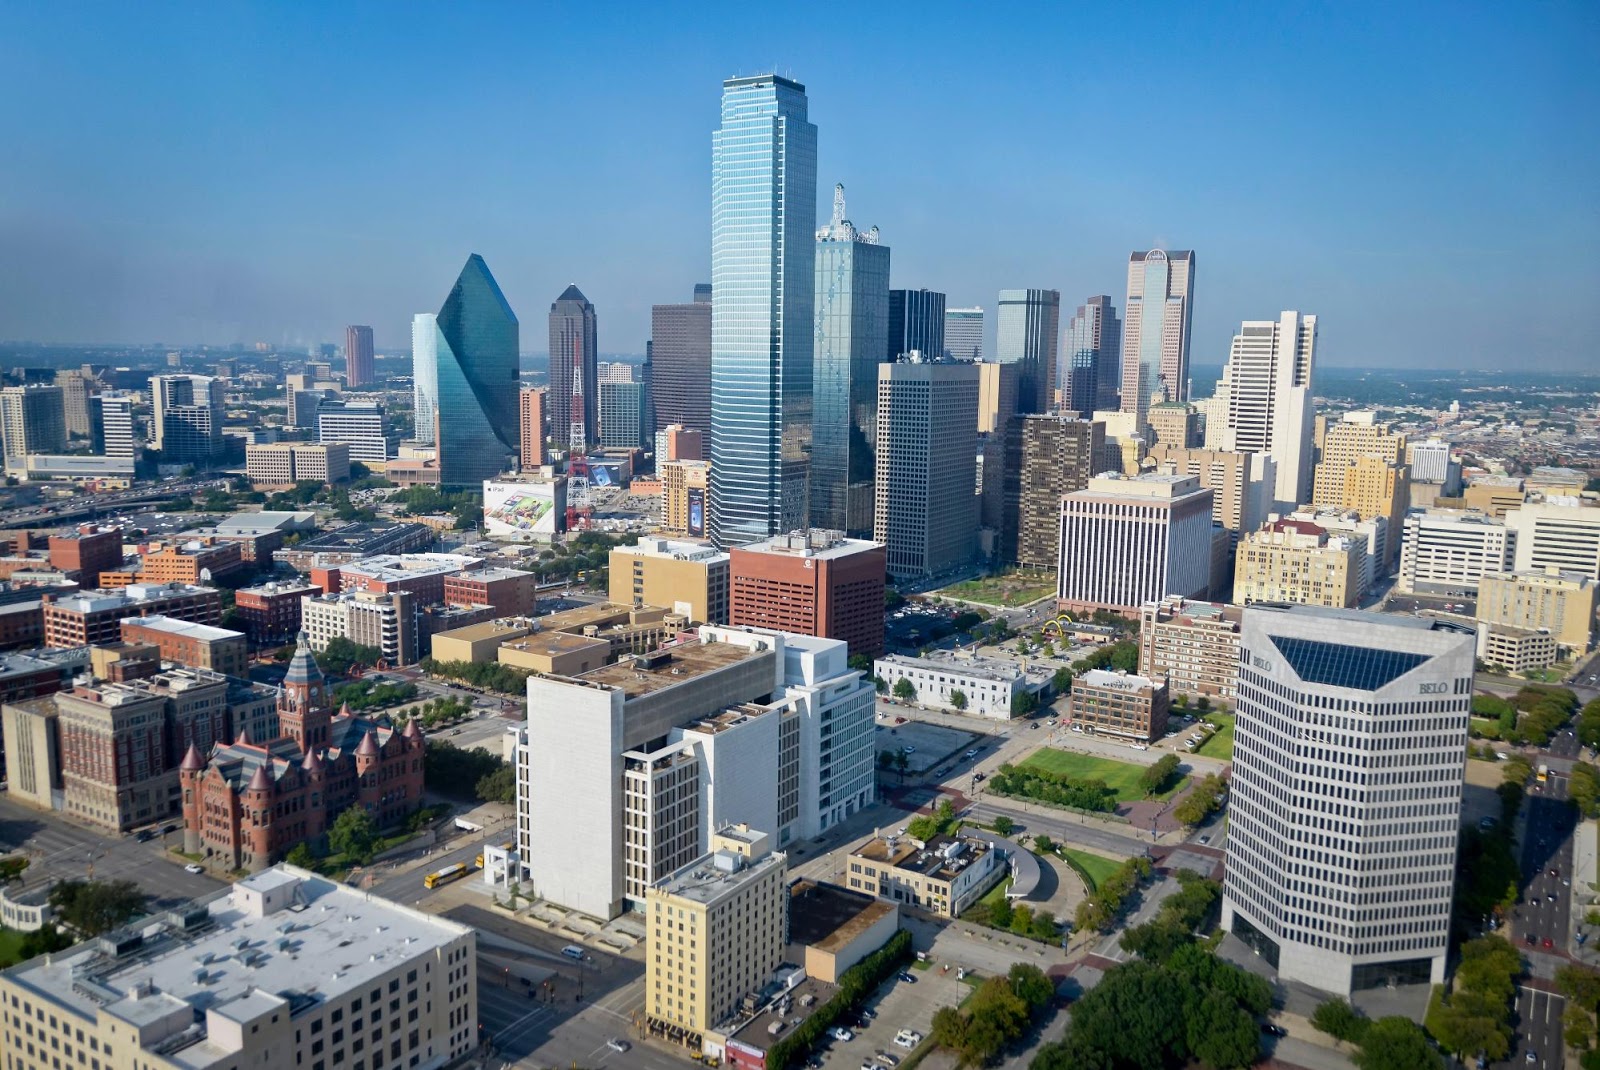 Live Like a Local: Top Spots to Stay in Dallas